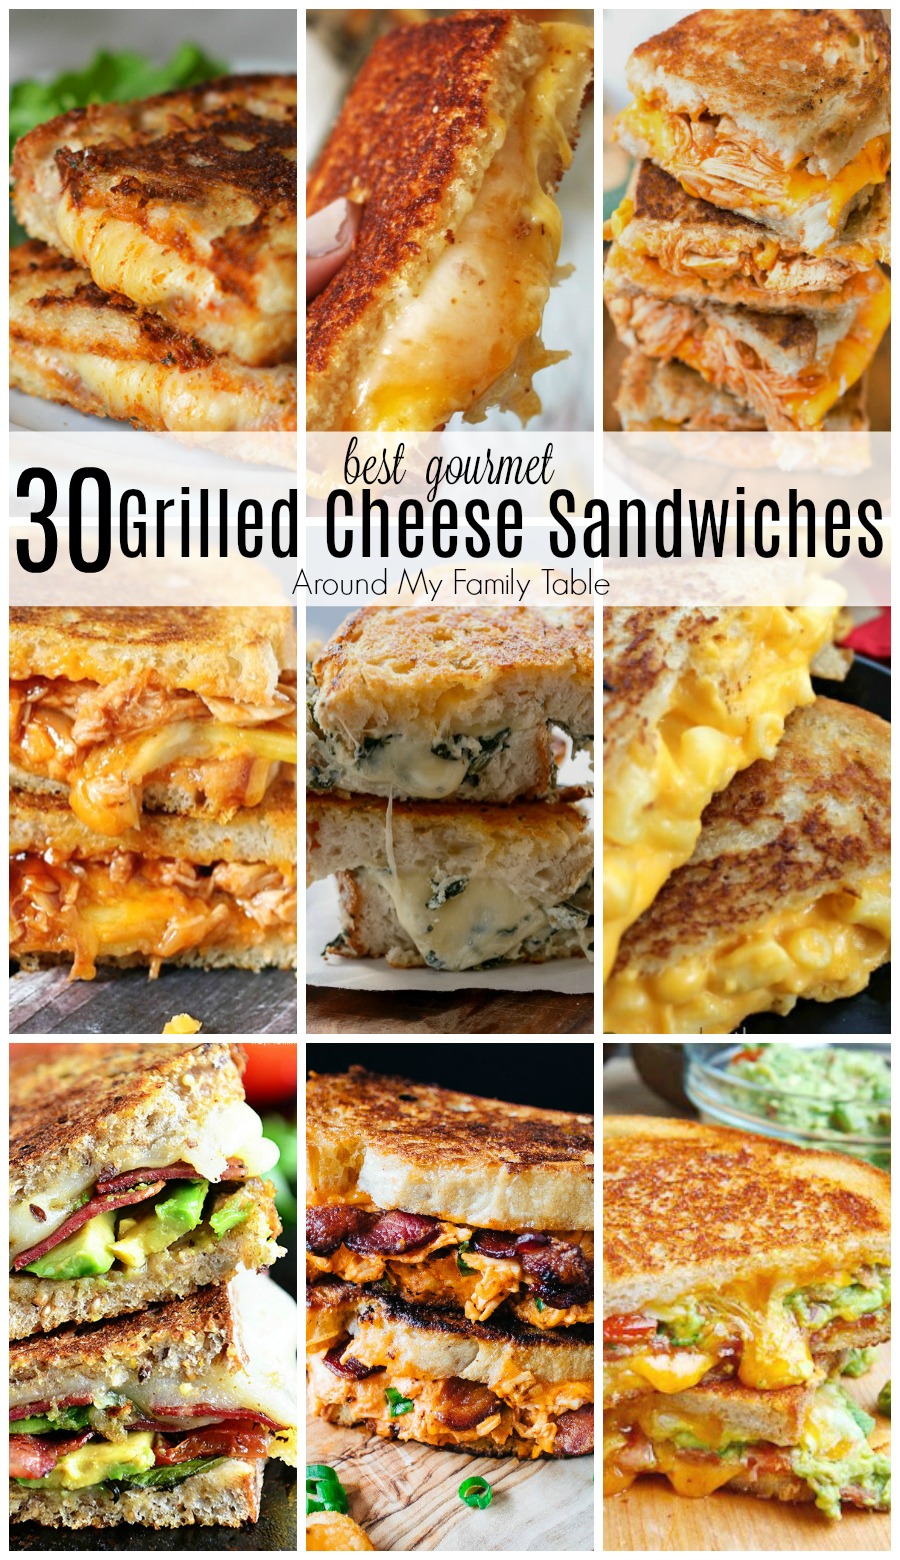 These are 30 of the best gourmet grilled cheese sandwiches that will satisfy your craving for the cheesy classic.